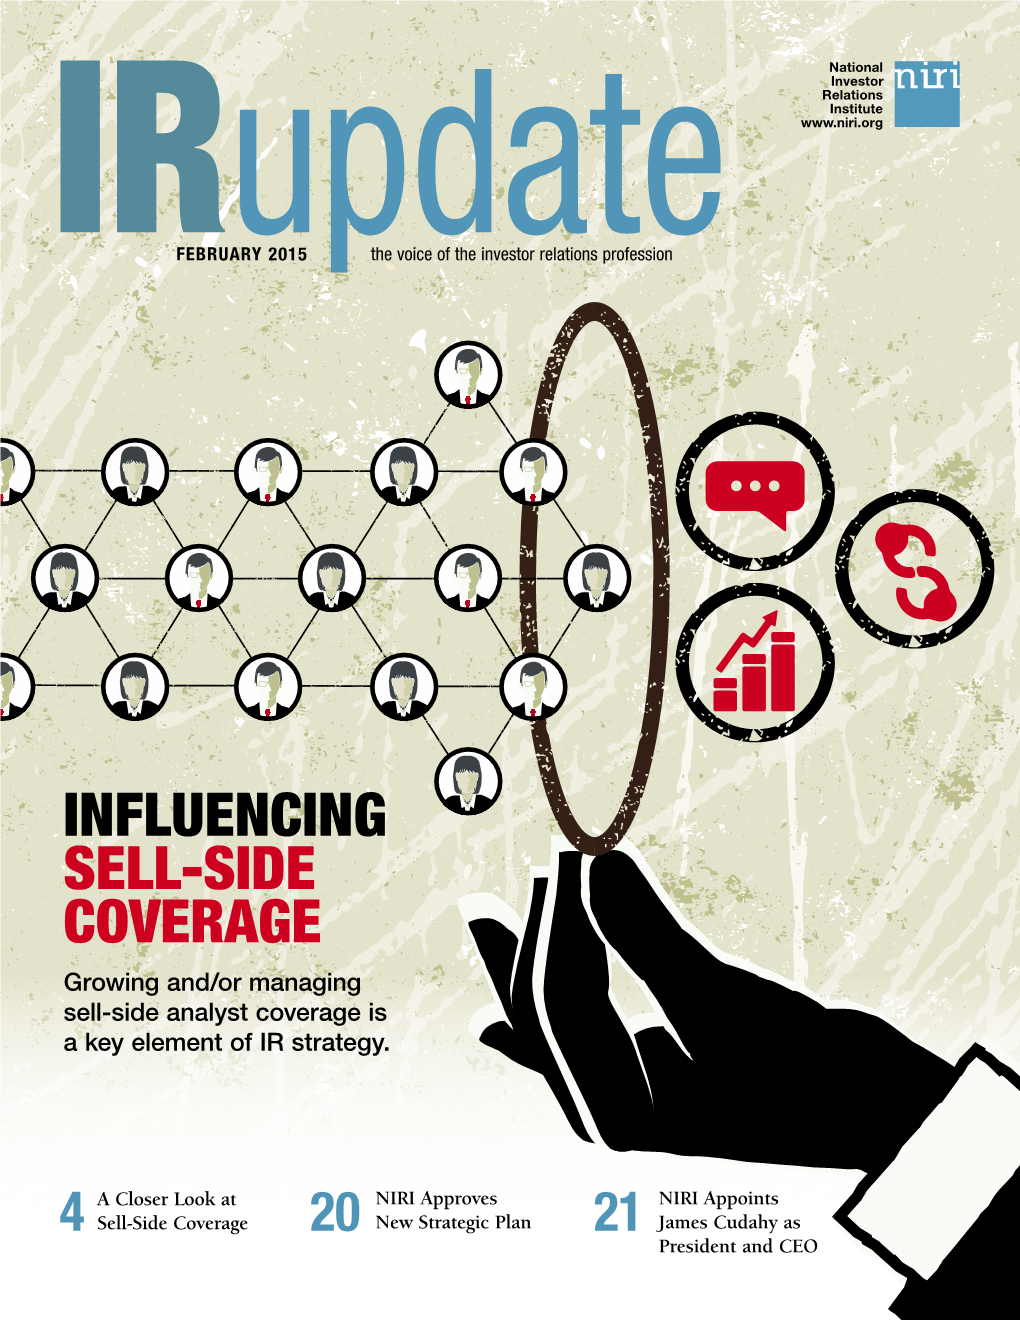 INFLUENCING SELL-SIDE COVERAGE Growing And/Or Managing Sell-Side Analyst Coverage Is a Key Element of IR Strategy